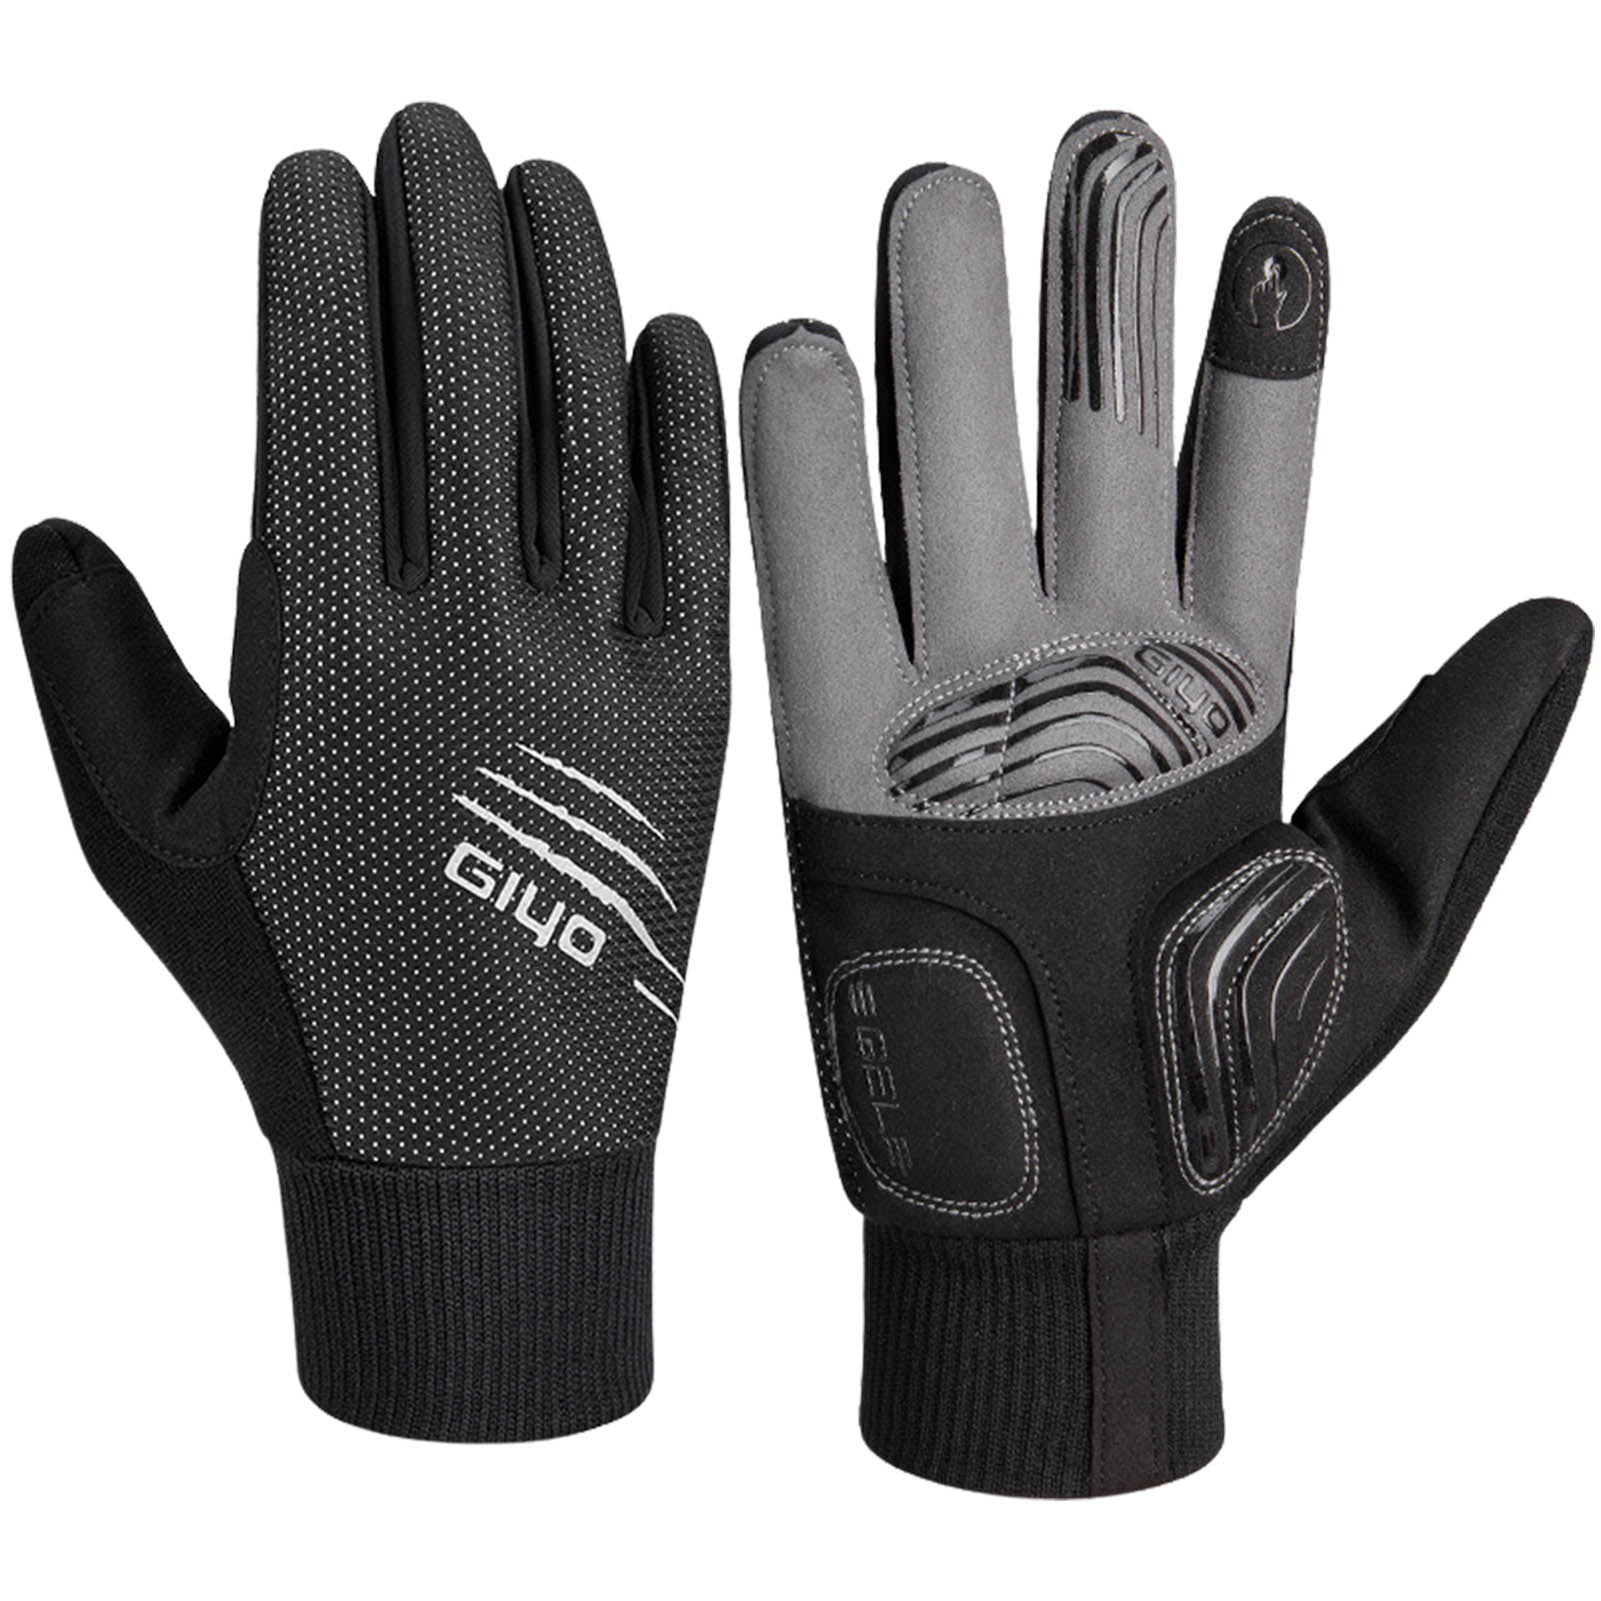 Cycling Winter Gloves Thermal Gloves Unisex Non-slip Windproof Men Women 